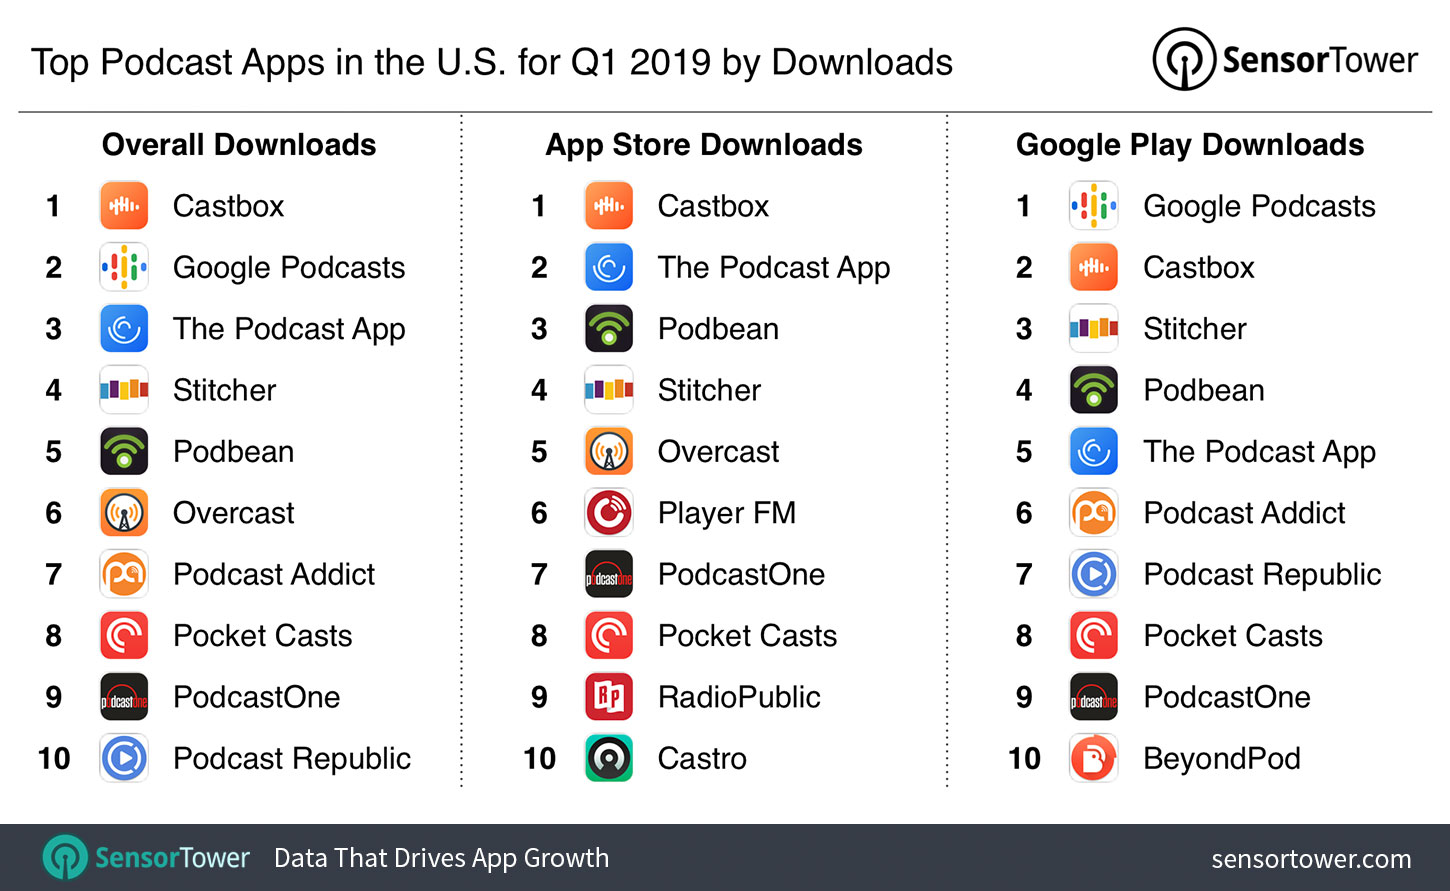 Top Podcast Apps in the U.S. for Q1 2019 by Downloads